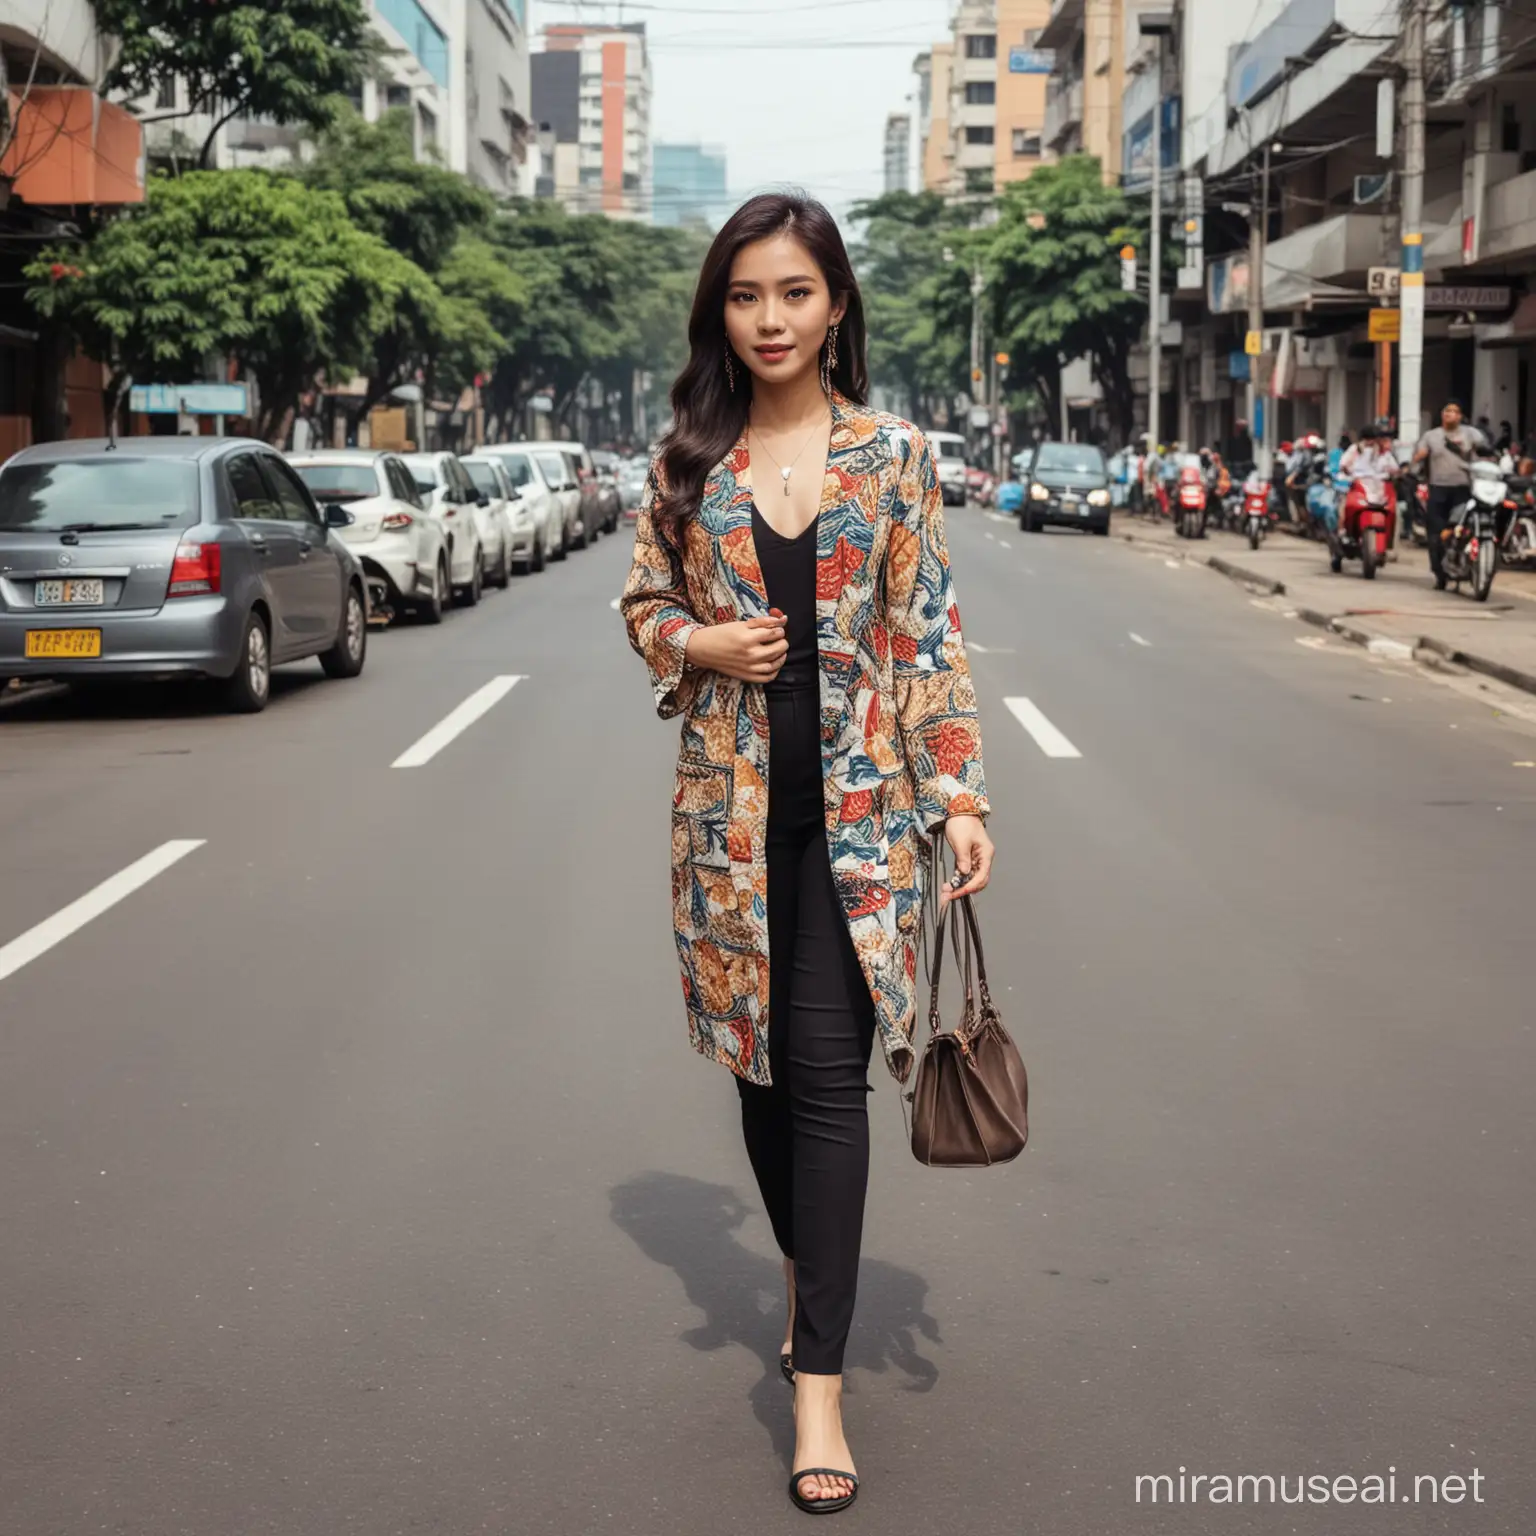 Indonesian Street Fashion Woman in Traditional Attire